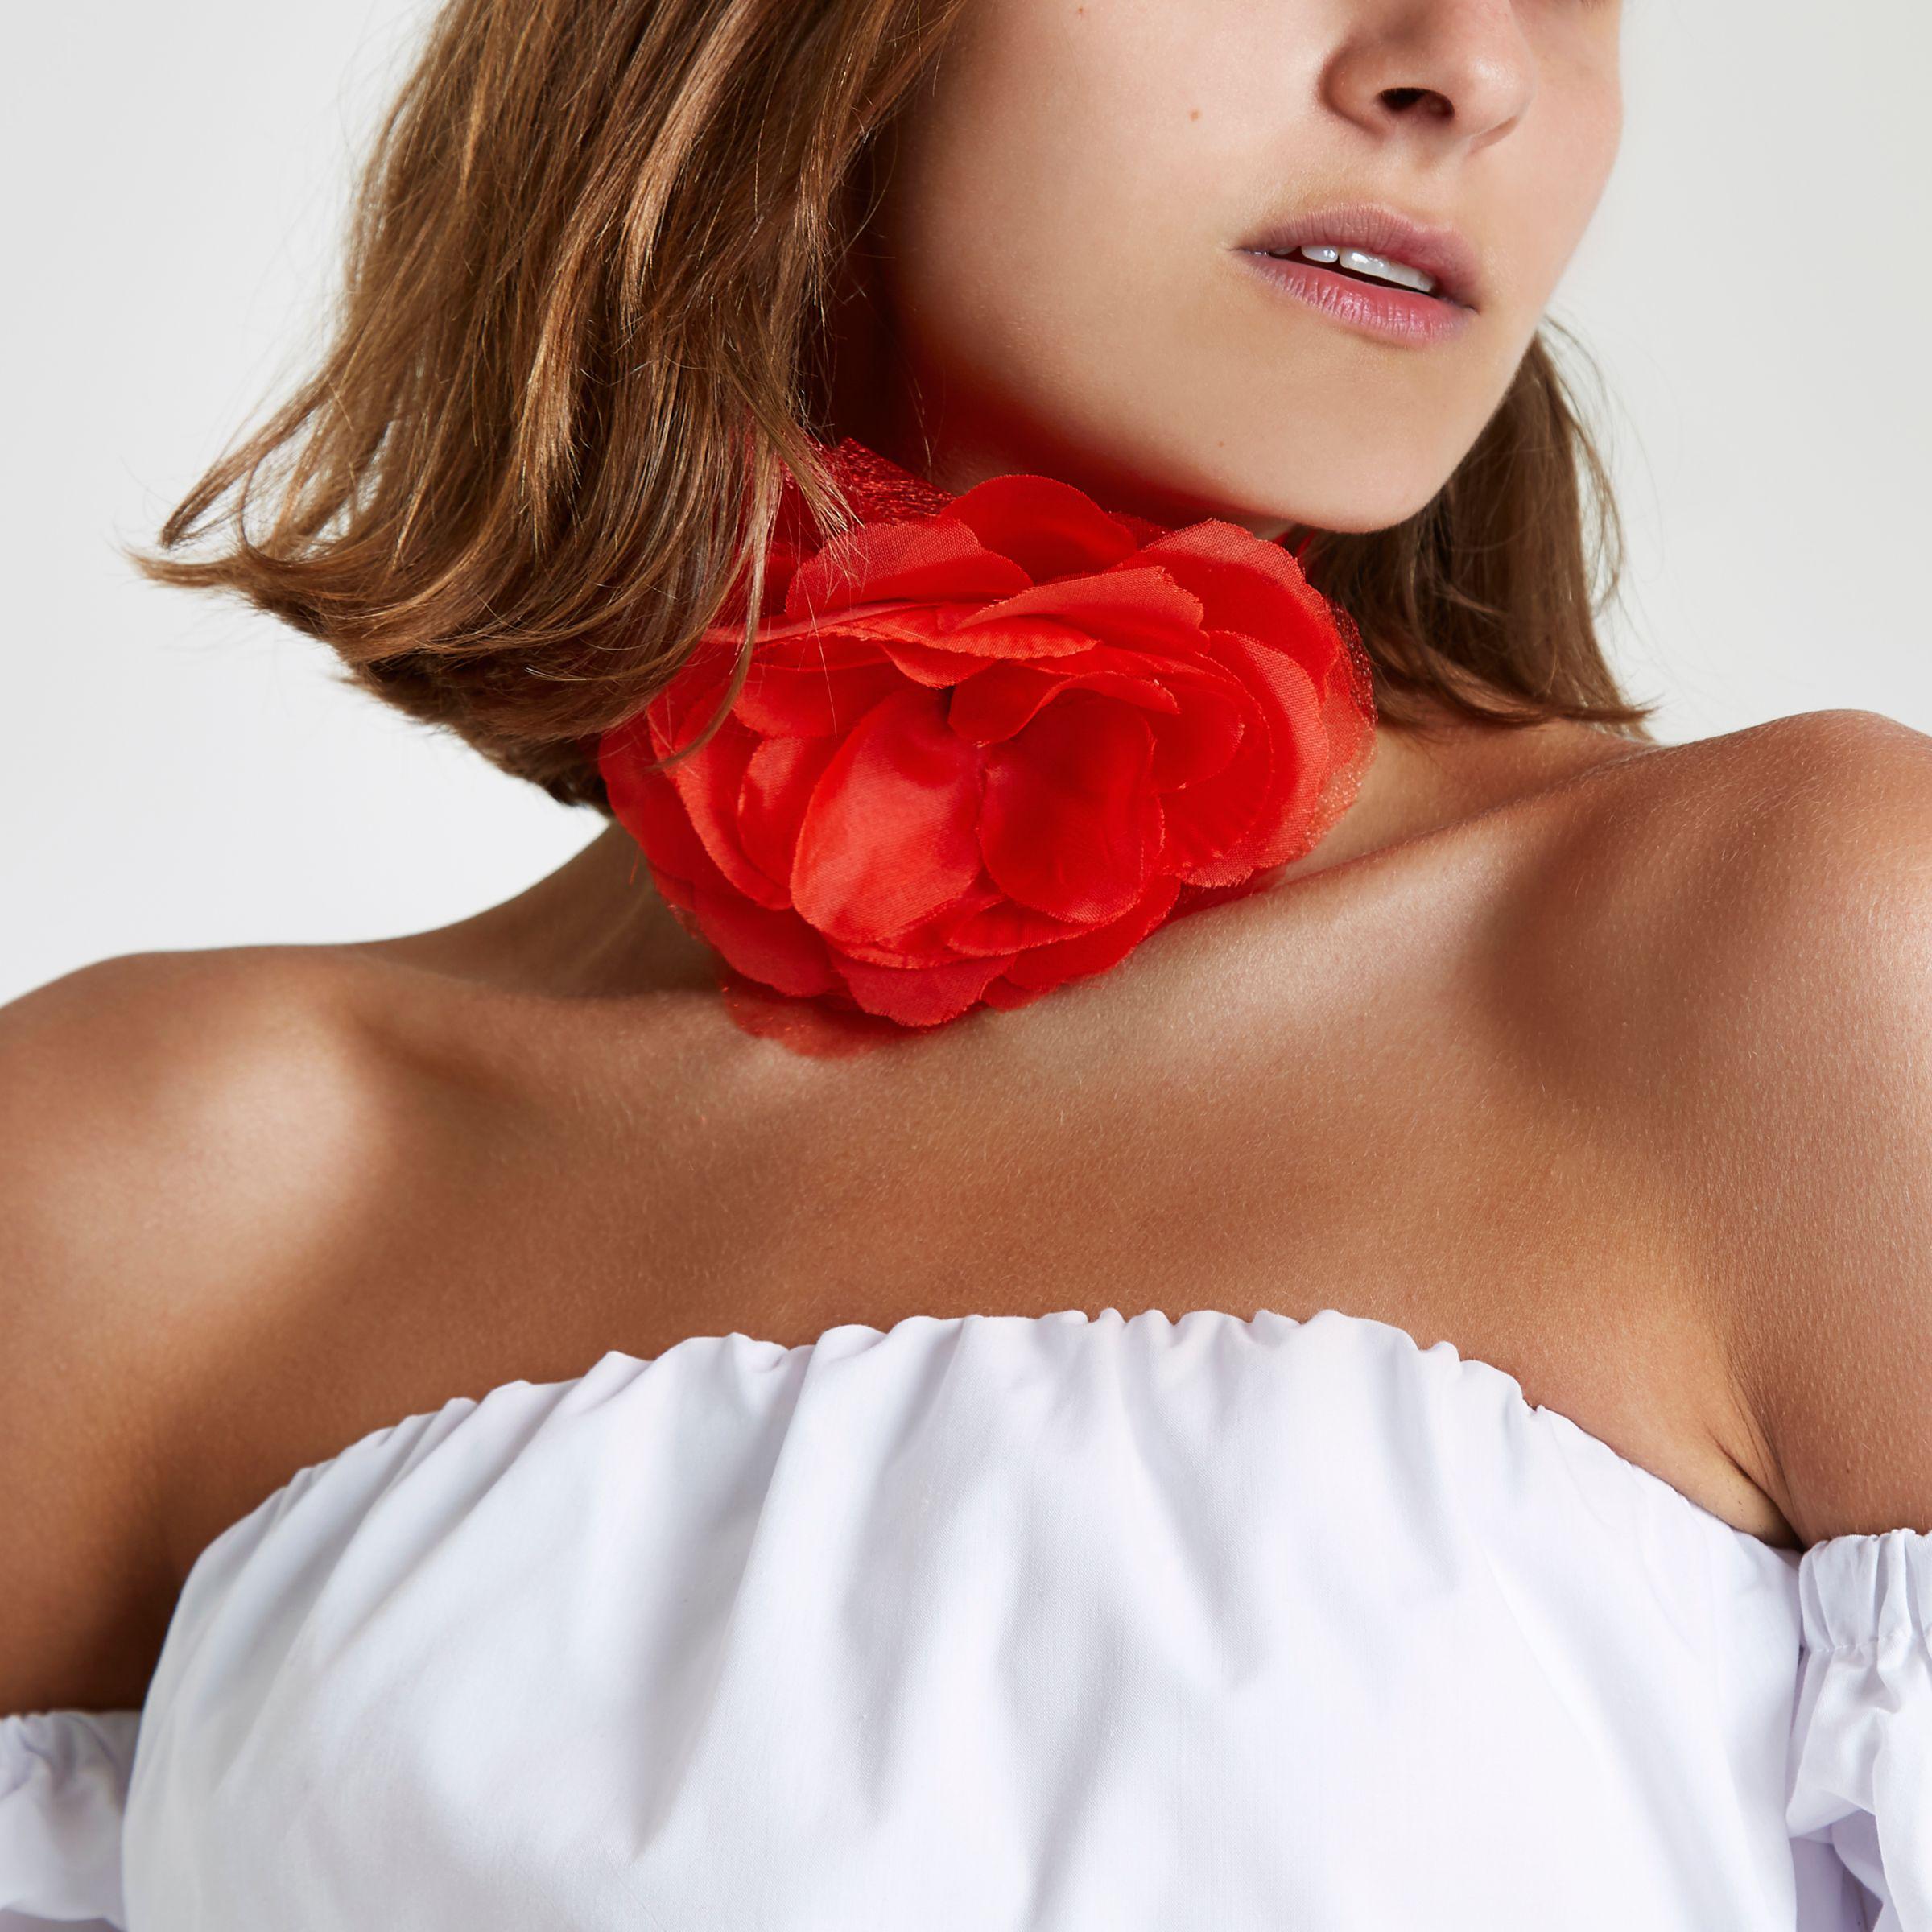 River Island Red Oversized Flower Corsage Choker